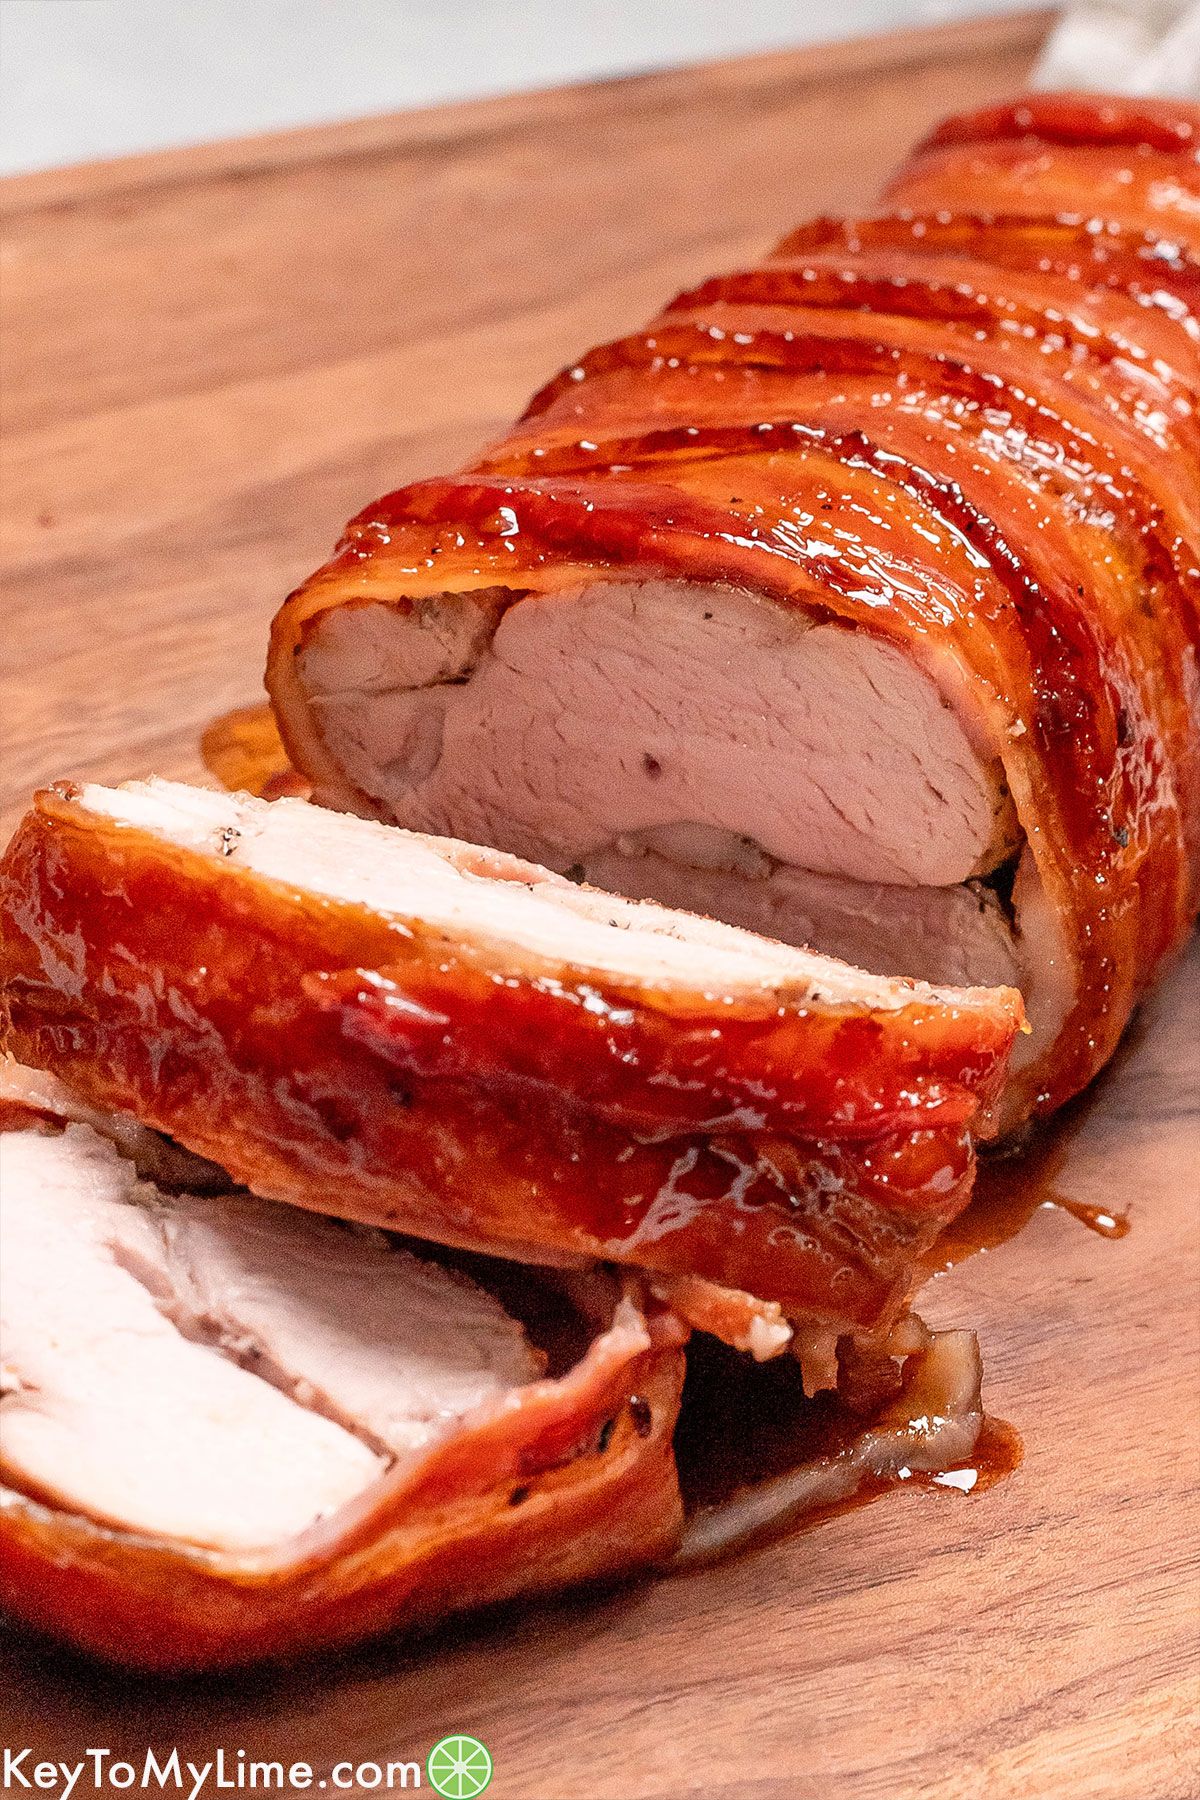 A close up side image showing the inside texture of the pork tenderloin resting on a cutting board.